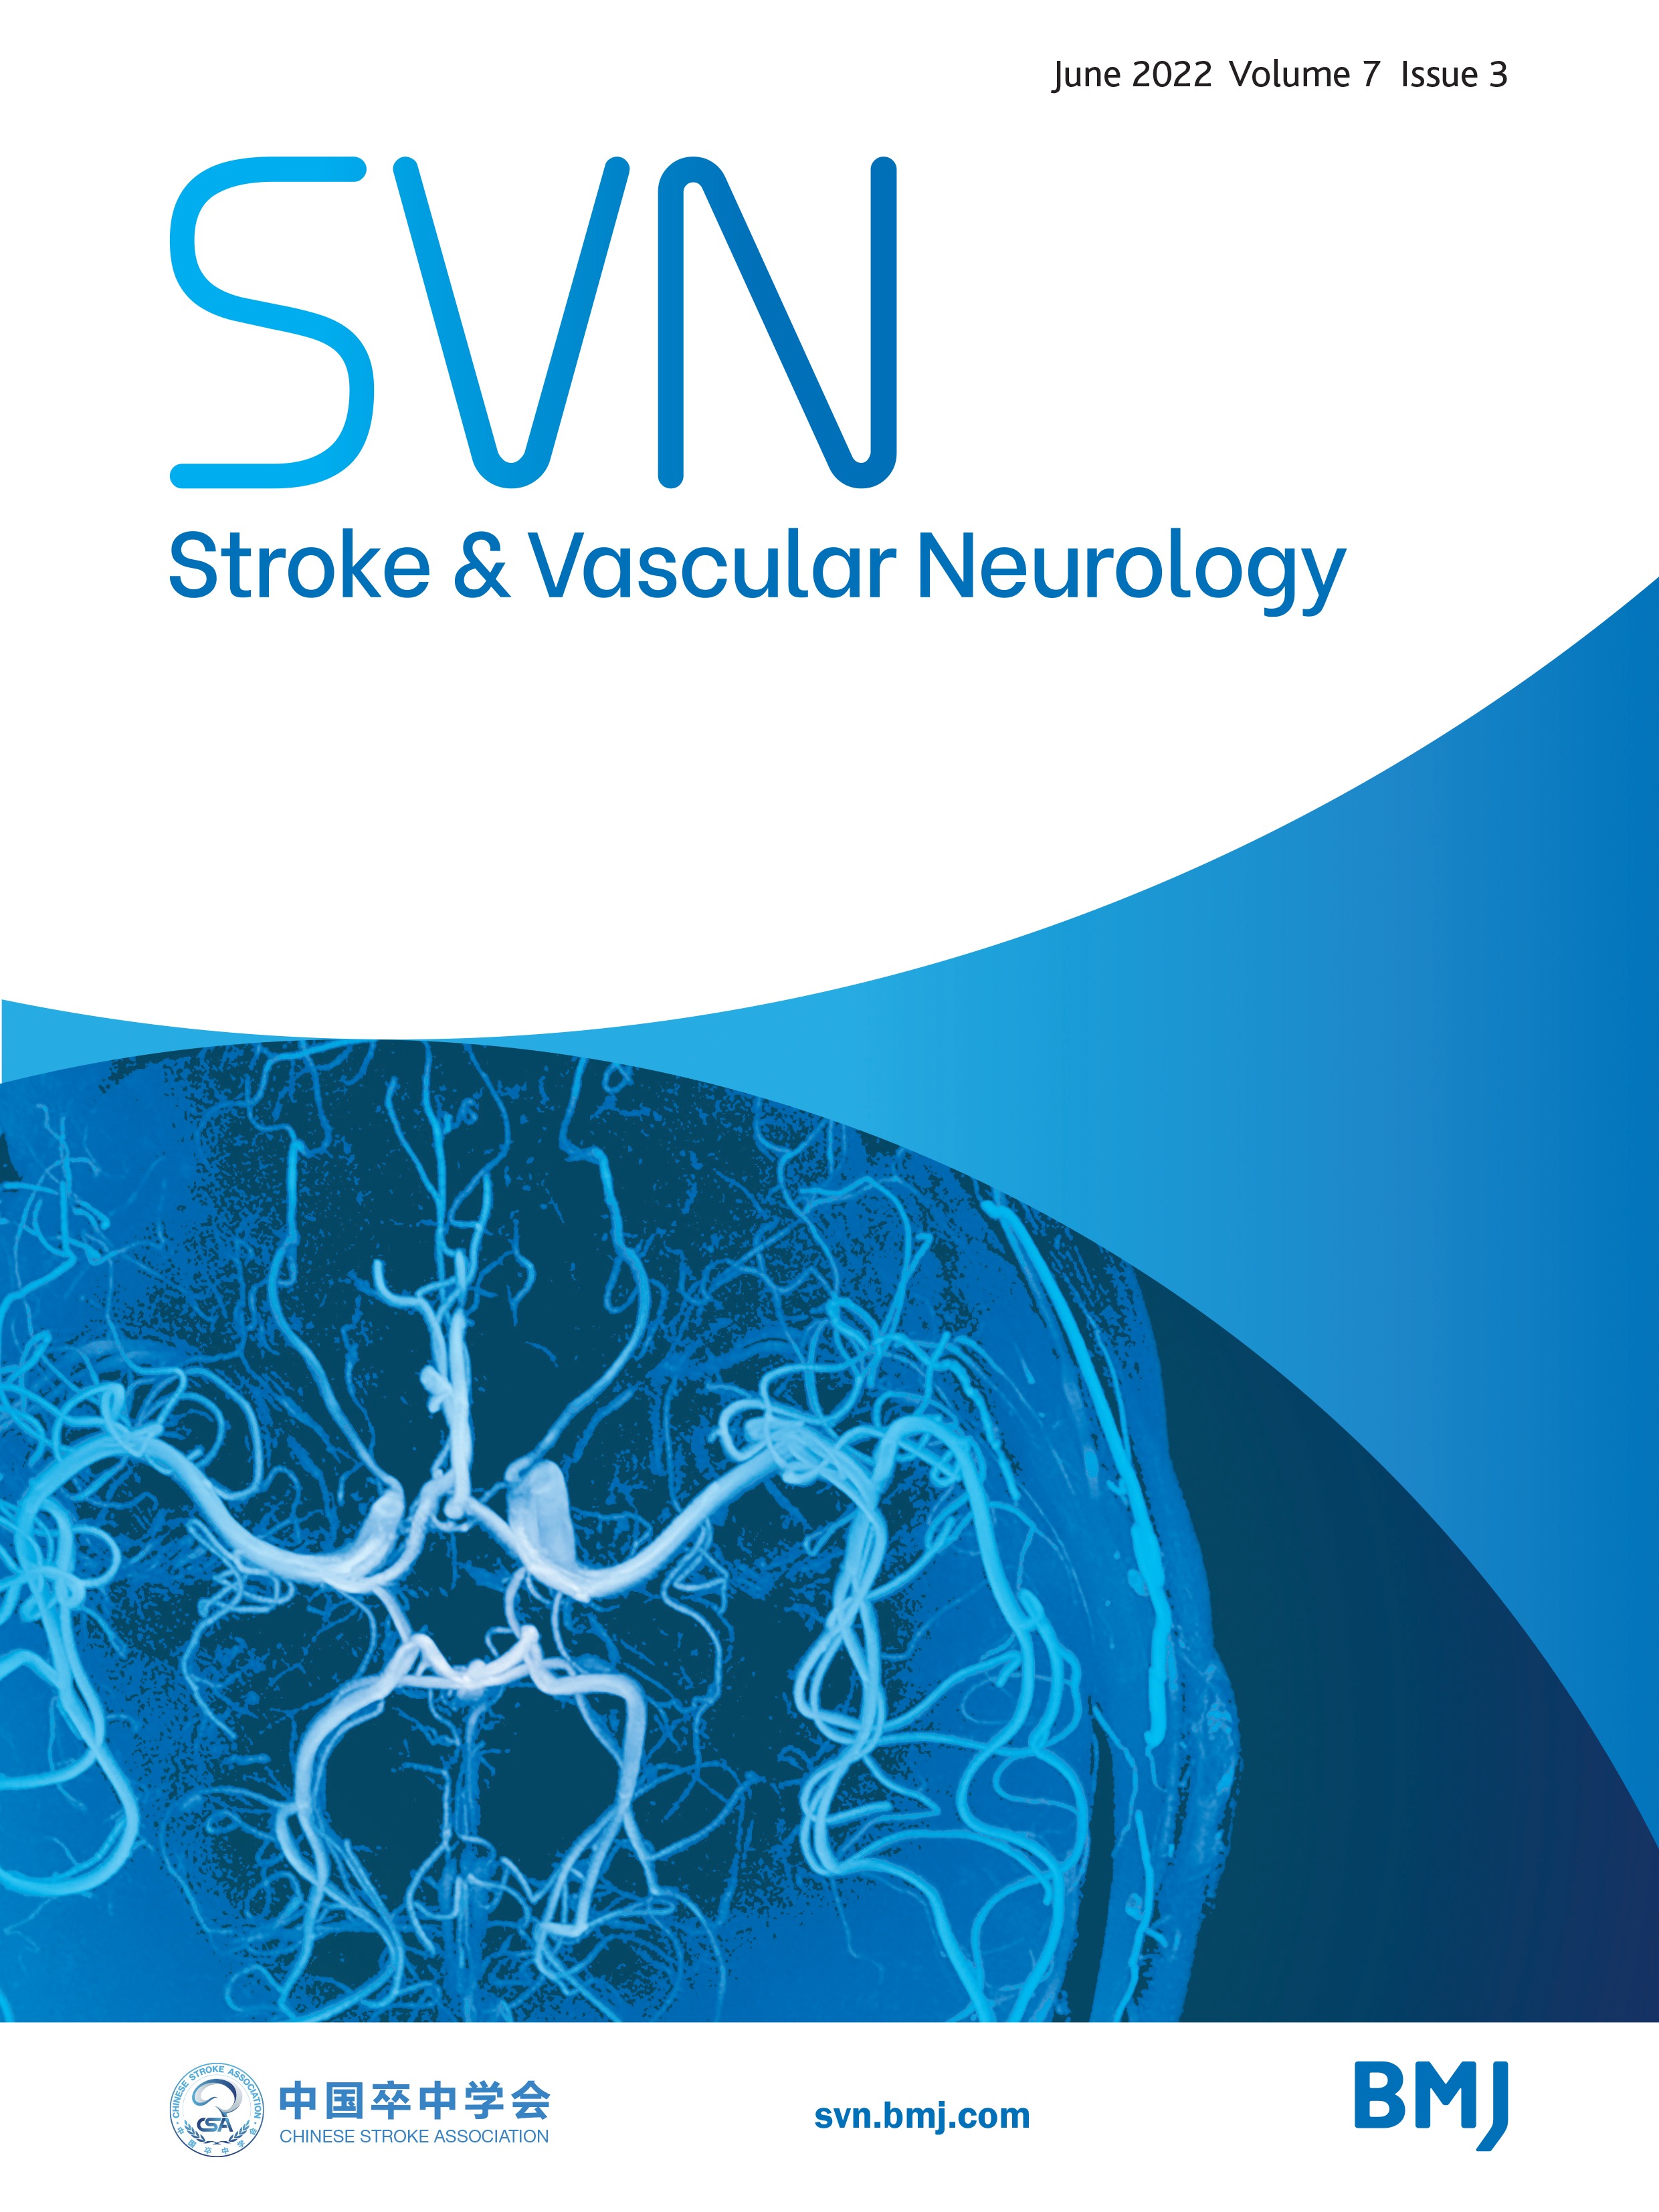 Endovascular treatment with or without intravenous alteplase for acute ischaemic stroke due to basilar artery occlusion